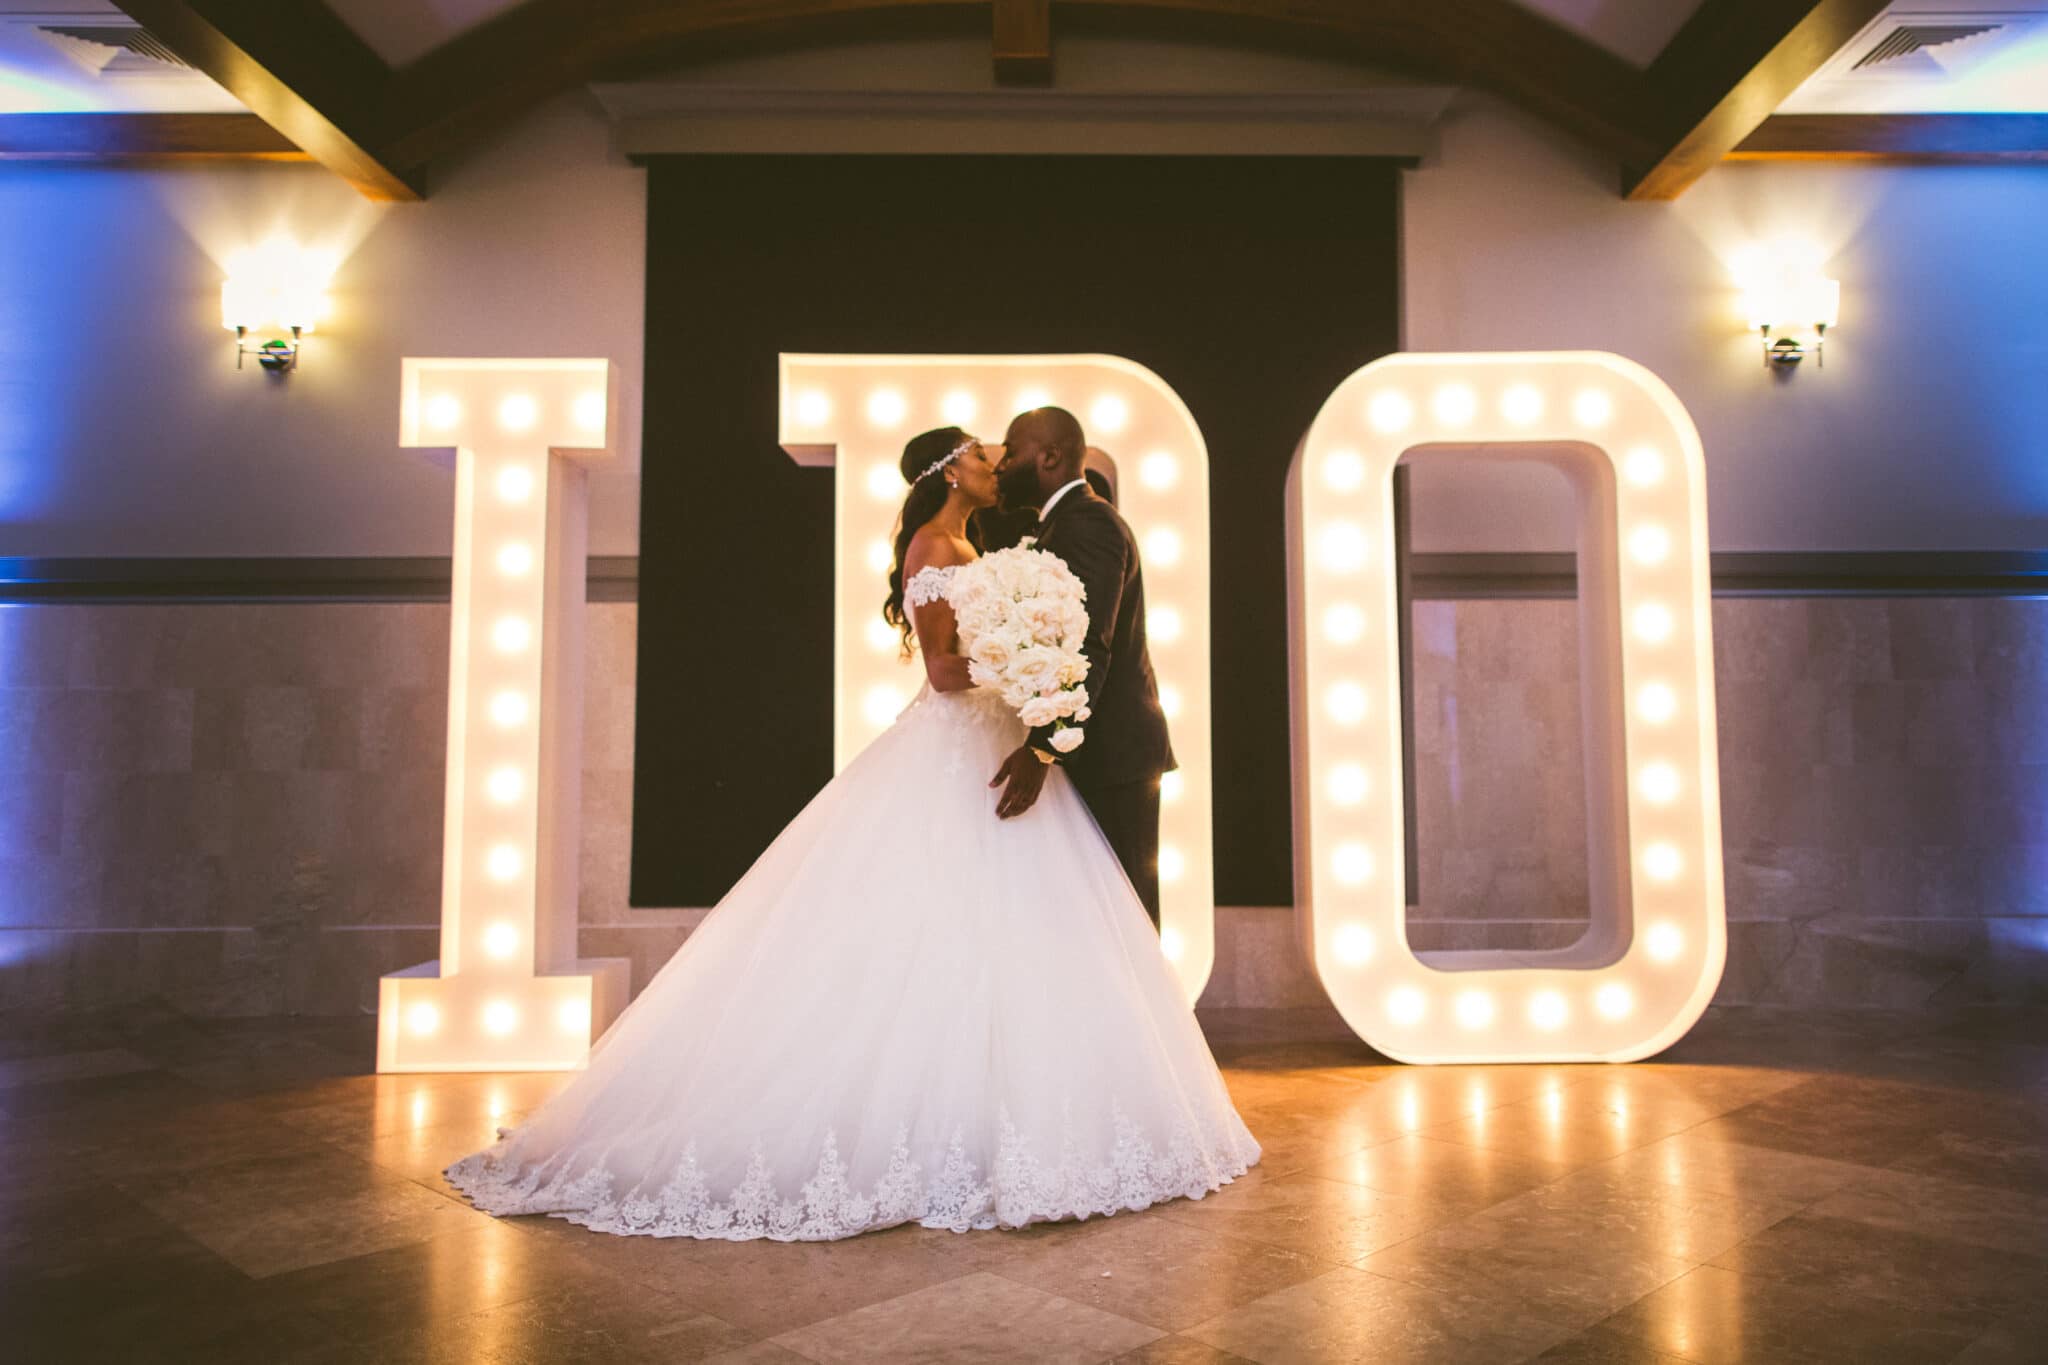 Anna Christine Events, bride & groom kissing in front of I DO light sign